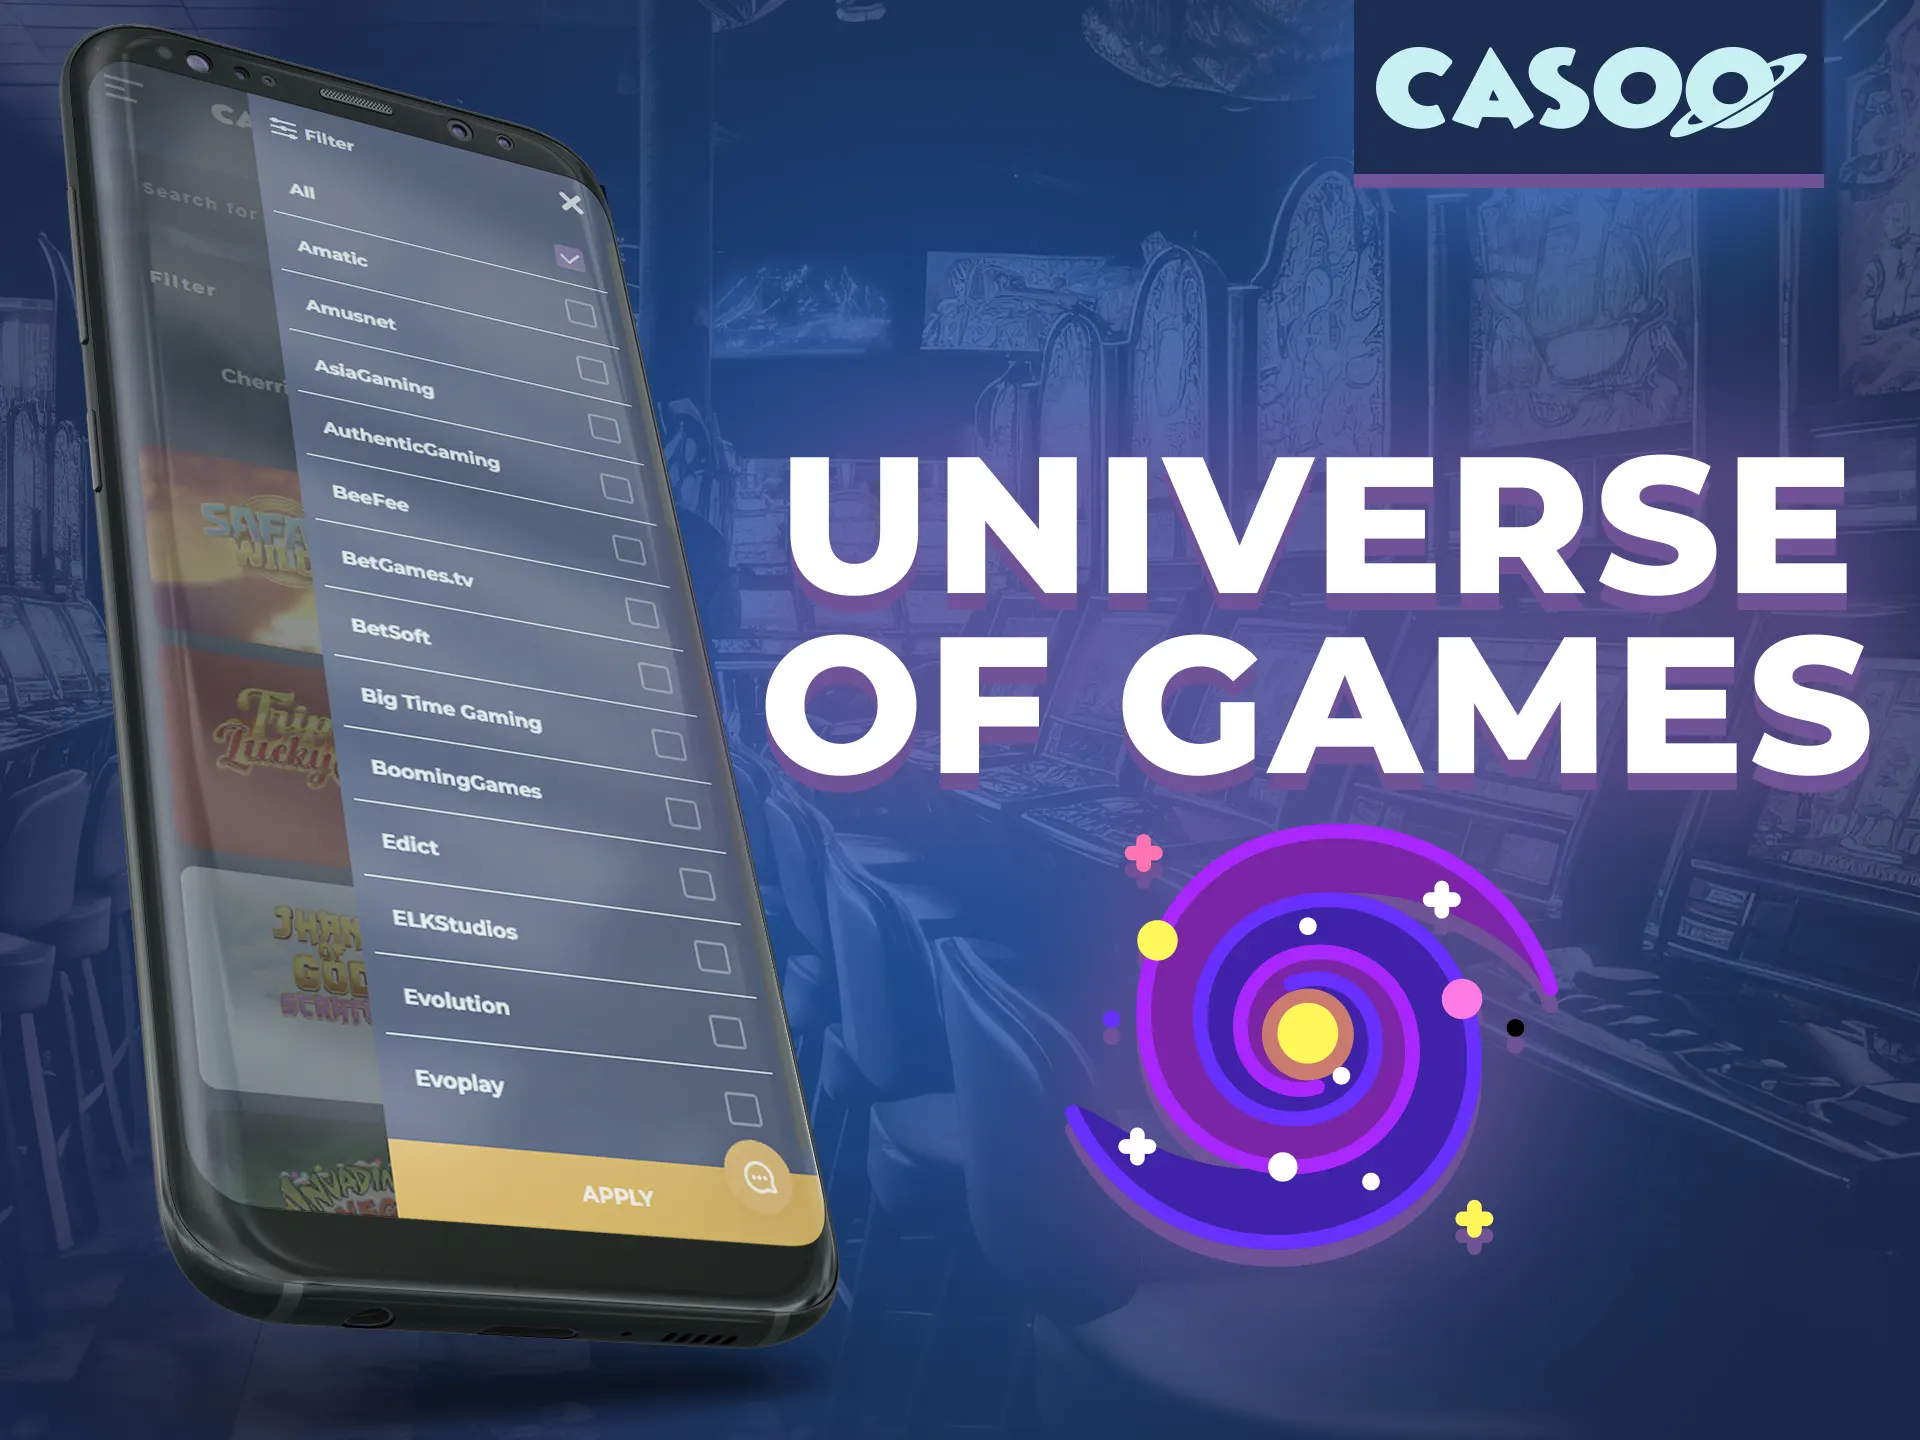 You can get into the universe of casino games, with big variety of games at Casoo casino.